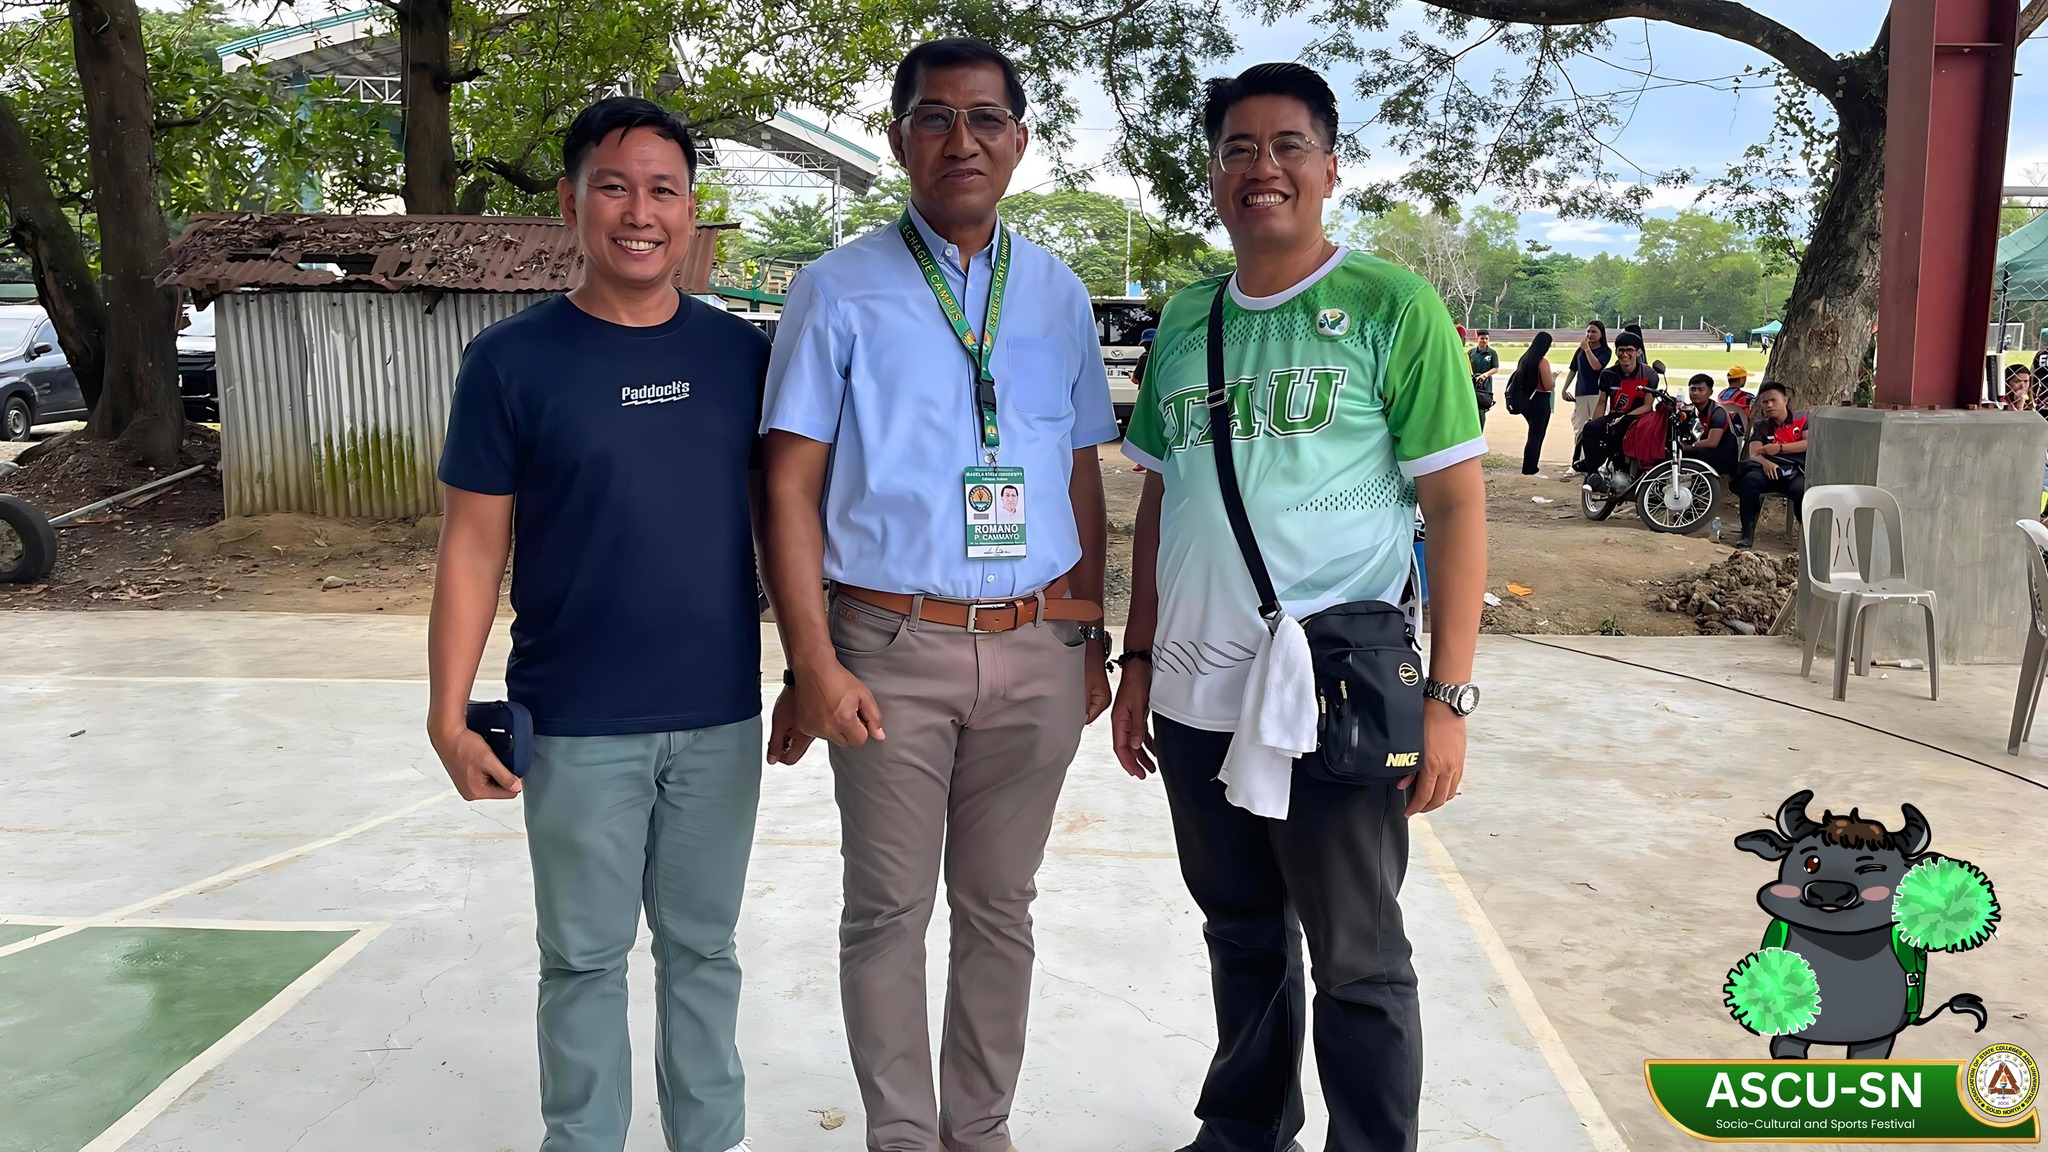 𝐂𝐀𝐏𝐓𝐔𝐑𝐄𝐃 𝐈𝐍 𝐋𝐄𝐍𝐒 | During the Socio-Cultural and Sports Festival of the Association of State Colleges and Universities - Solid North (ASCU-SN) 2024 event, Dr. Silverio Ramon DC. Salunson, University President of Tarlac Agricultural University (TAU), Dr. Arnold R. Lorenzo, Officer In-Charge (OIC) Vice President for Finance and Administration (VPFA) at TAU, and Atty. Romano P. Cammayo, Vice President for Finance and Services at Isabela State University (ISU), engage in a lively banter exchange, showcasing their camaraderie and setting a positive tone for the competitions-filled day.